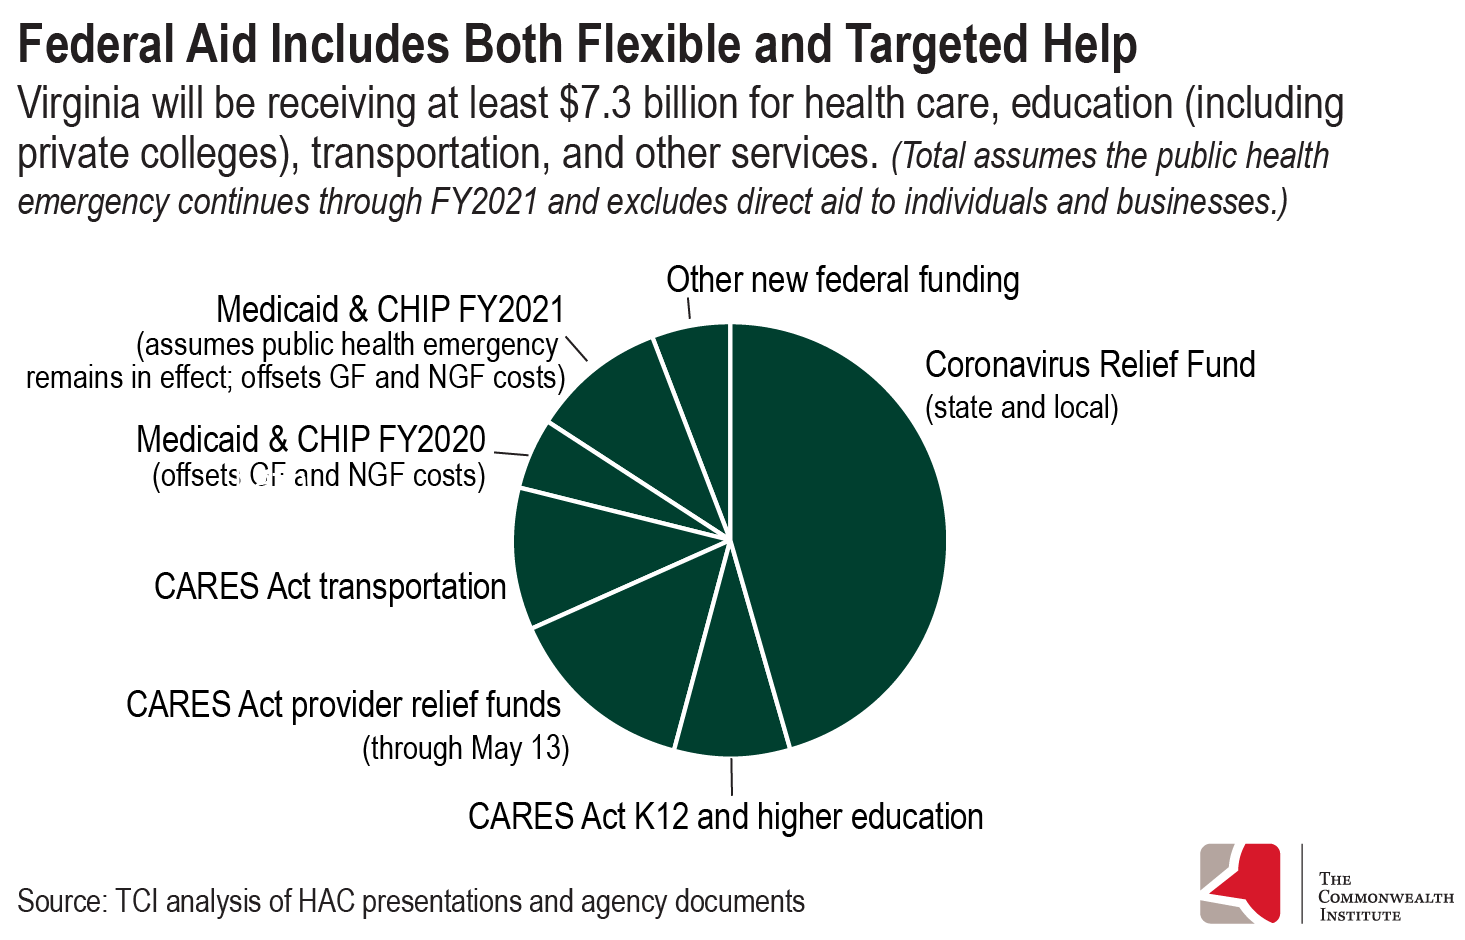 Circle graph showing the sources of the 7.3 billion dollars in both flexible and targeted federal aid for health care, education including private colleges, transportation, and other services.